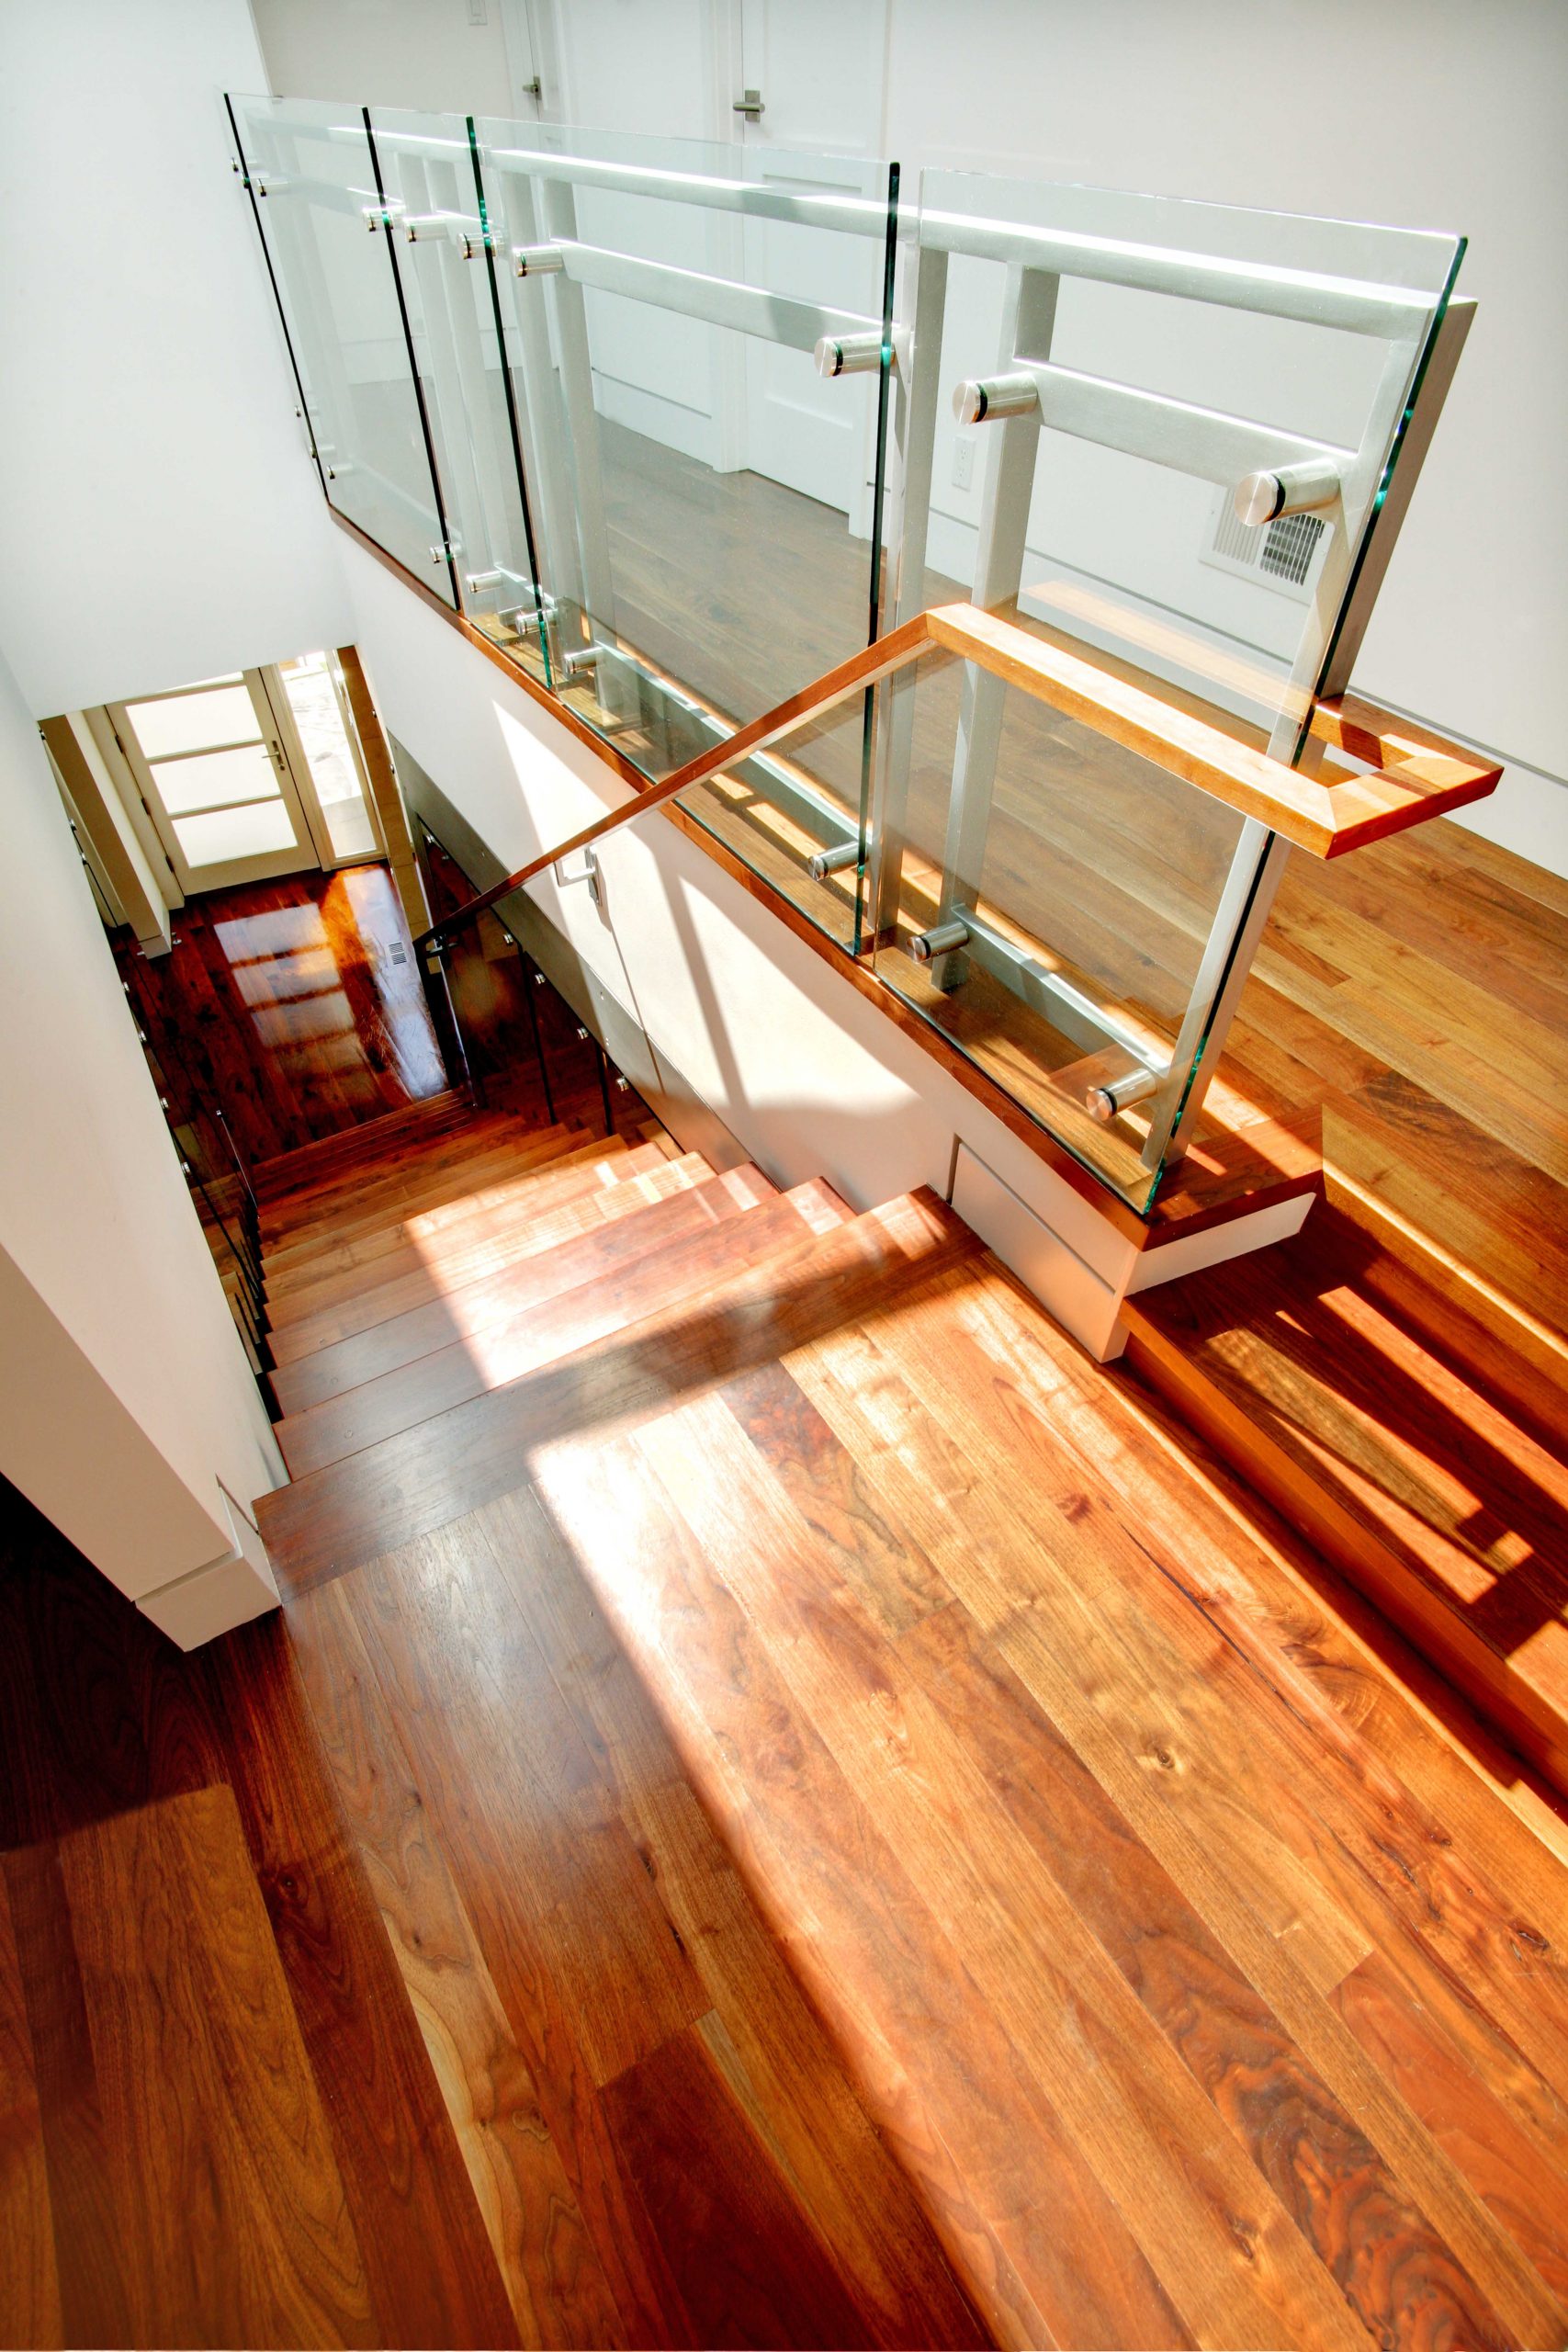 Gunderson Residence Glass and Wood Stair Details